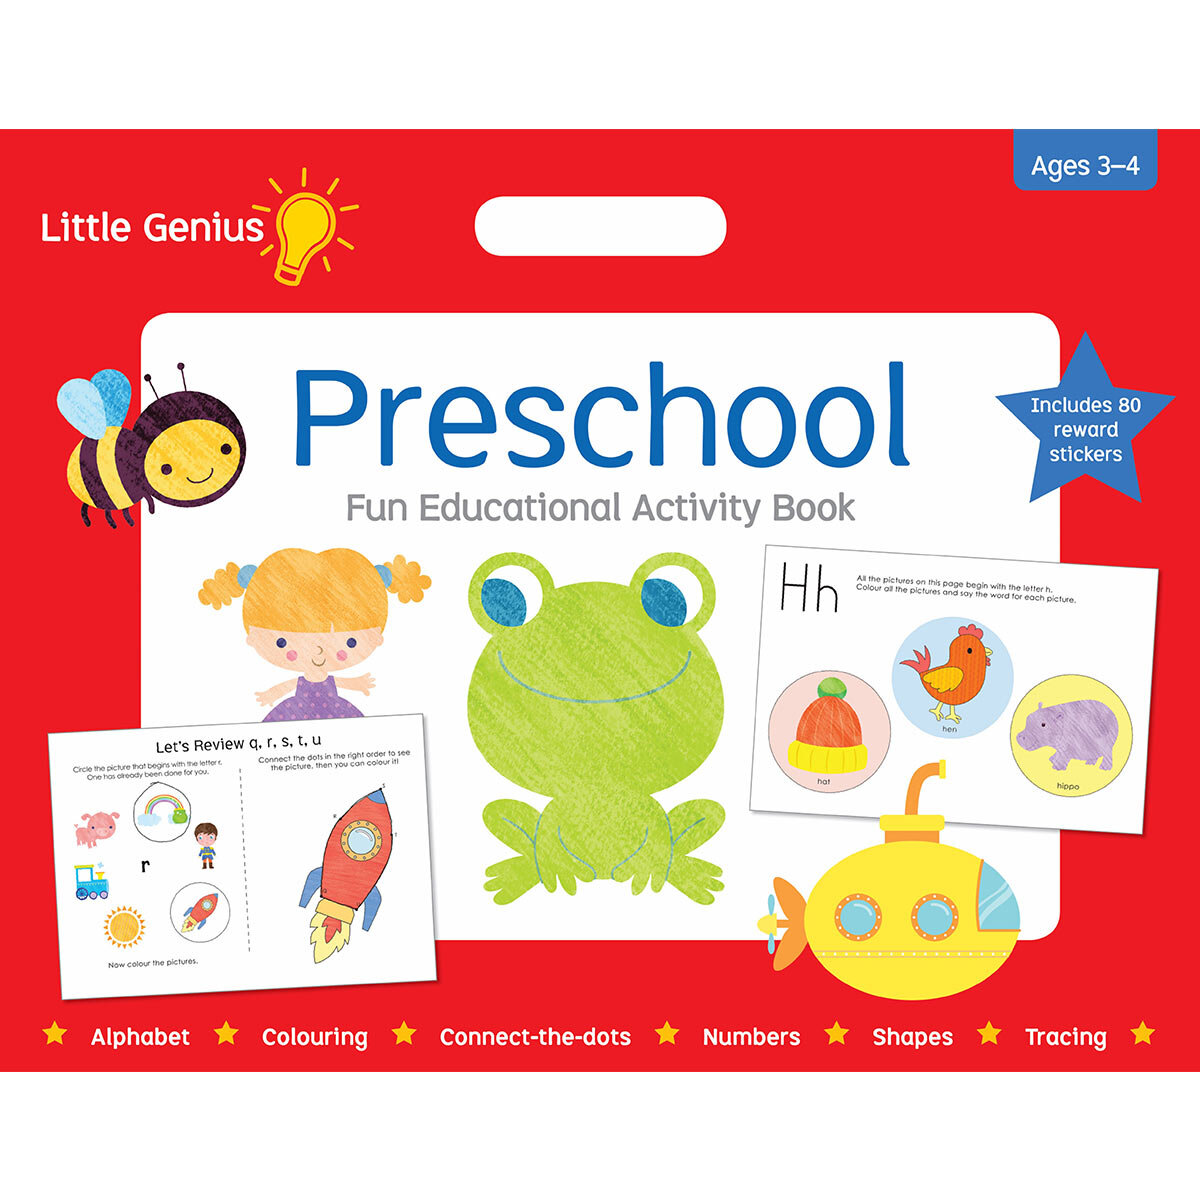 Image of front of book-starting preschool,